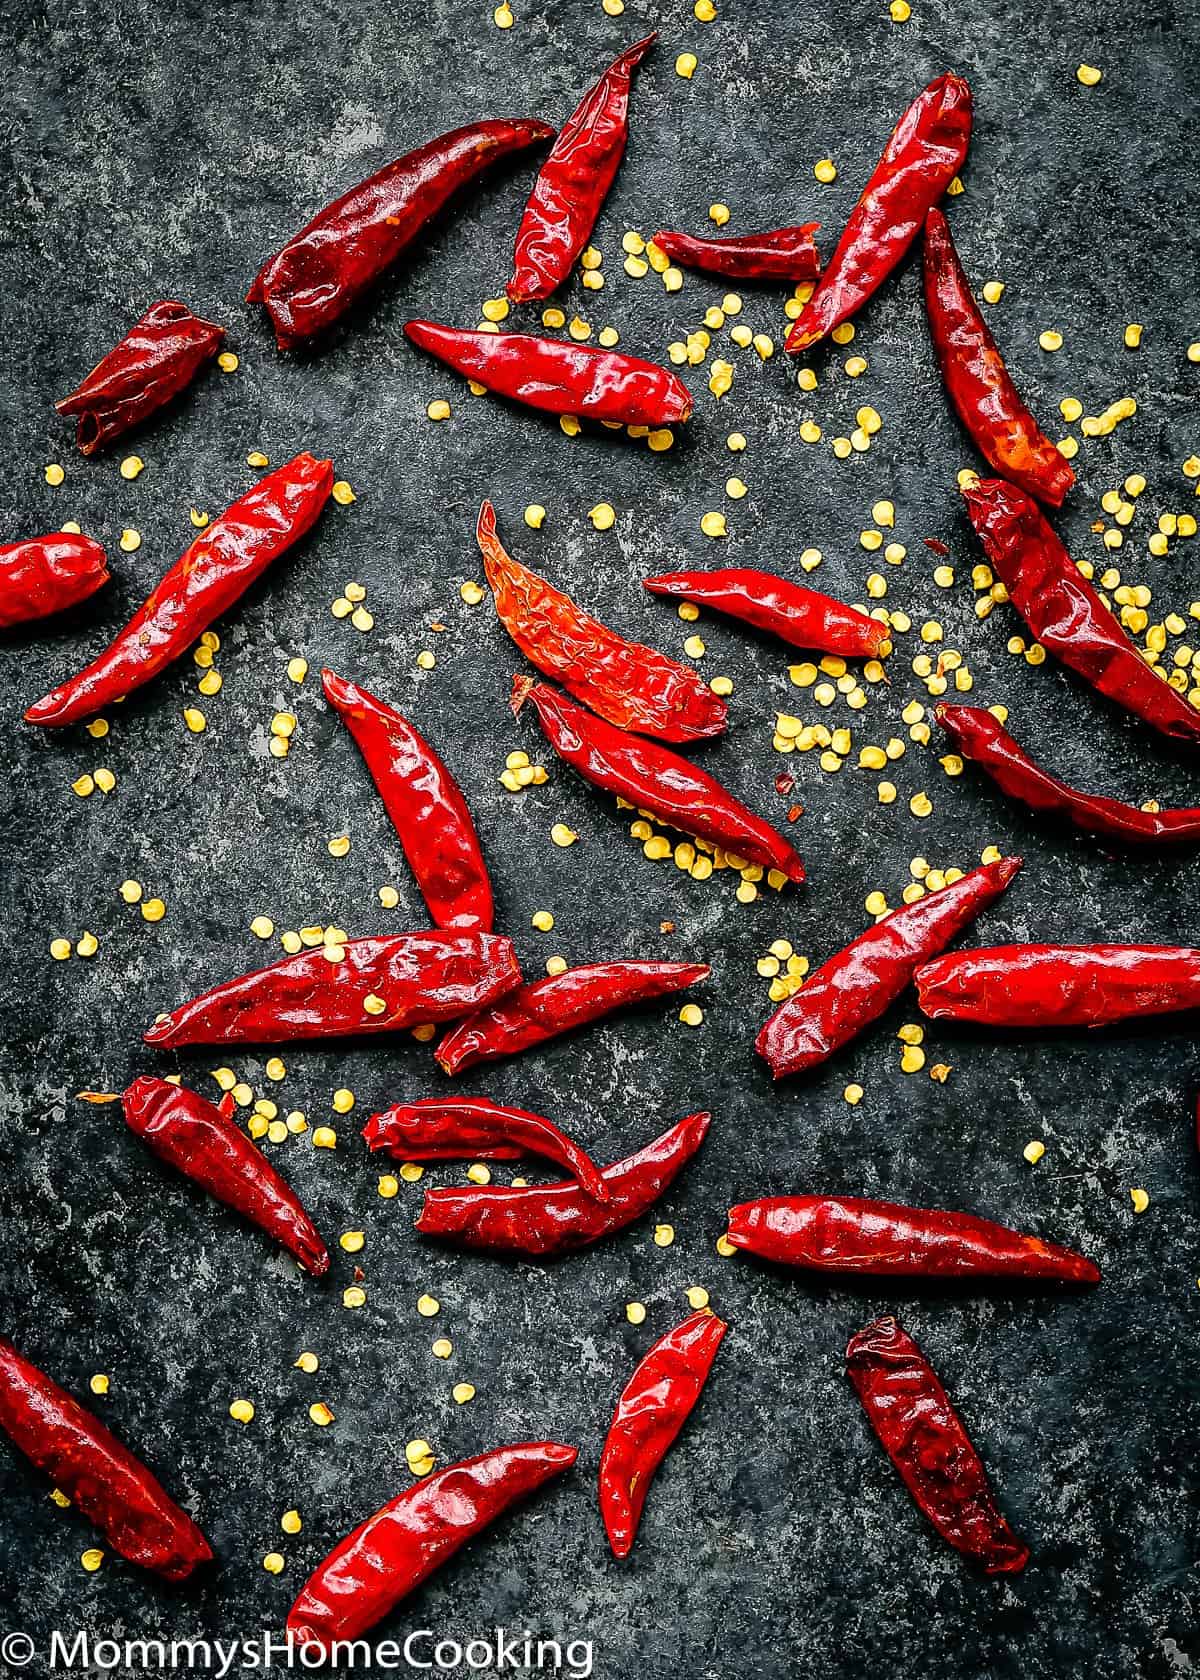 dried red chilies over a black stone